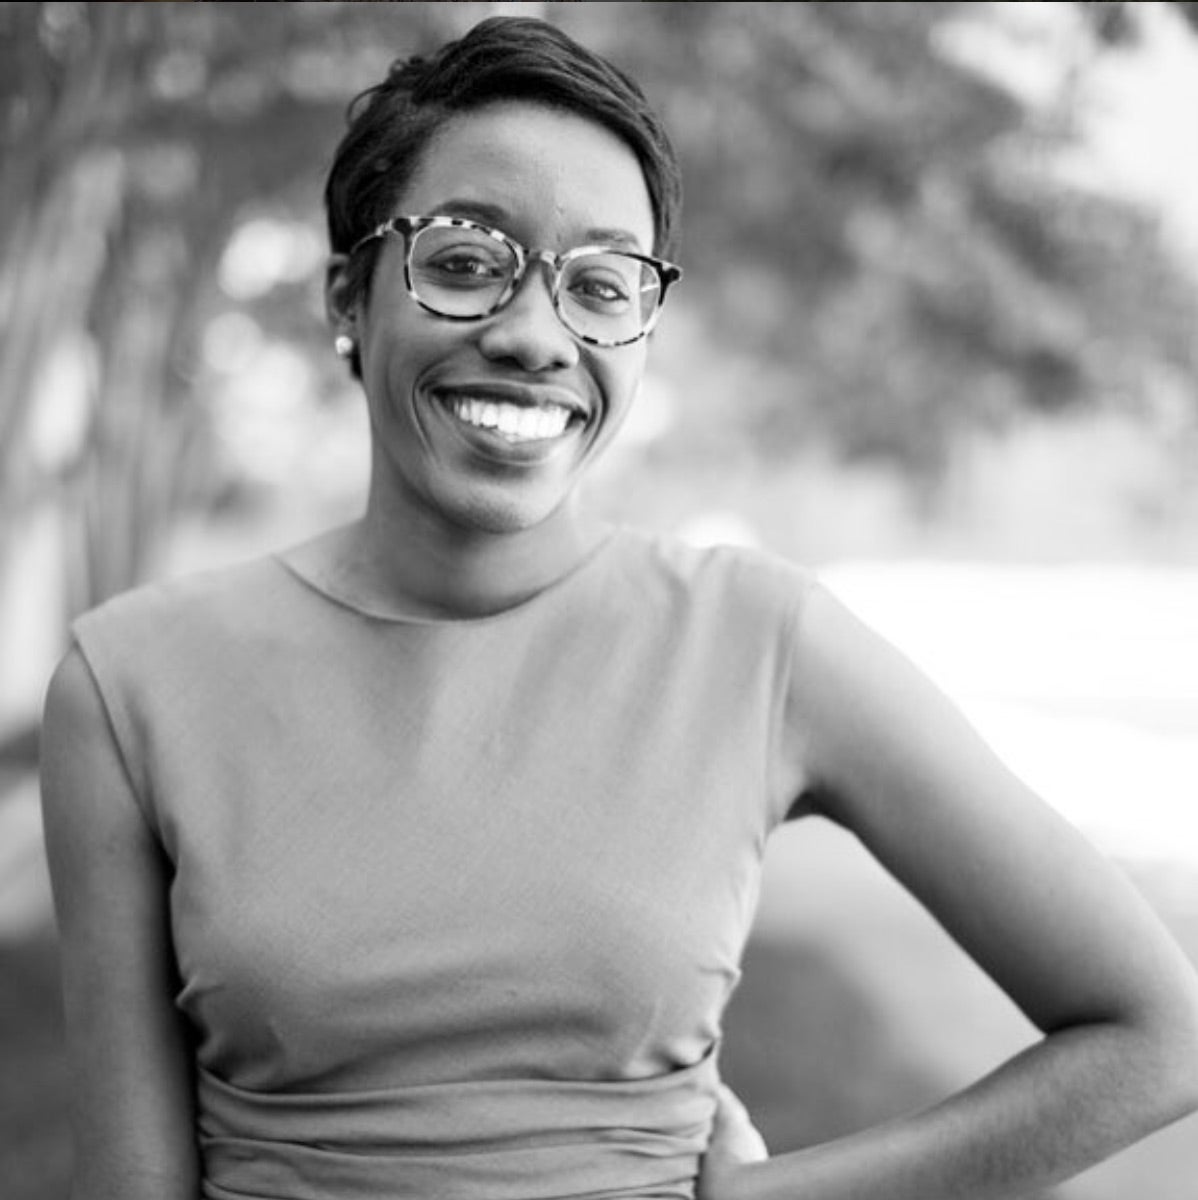 Lauren Underwood: 15 Things To Know About The Youngest Black Woman Running For Congress In 2018
